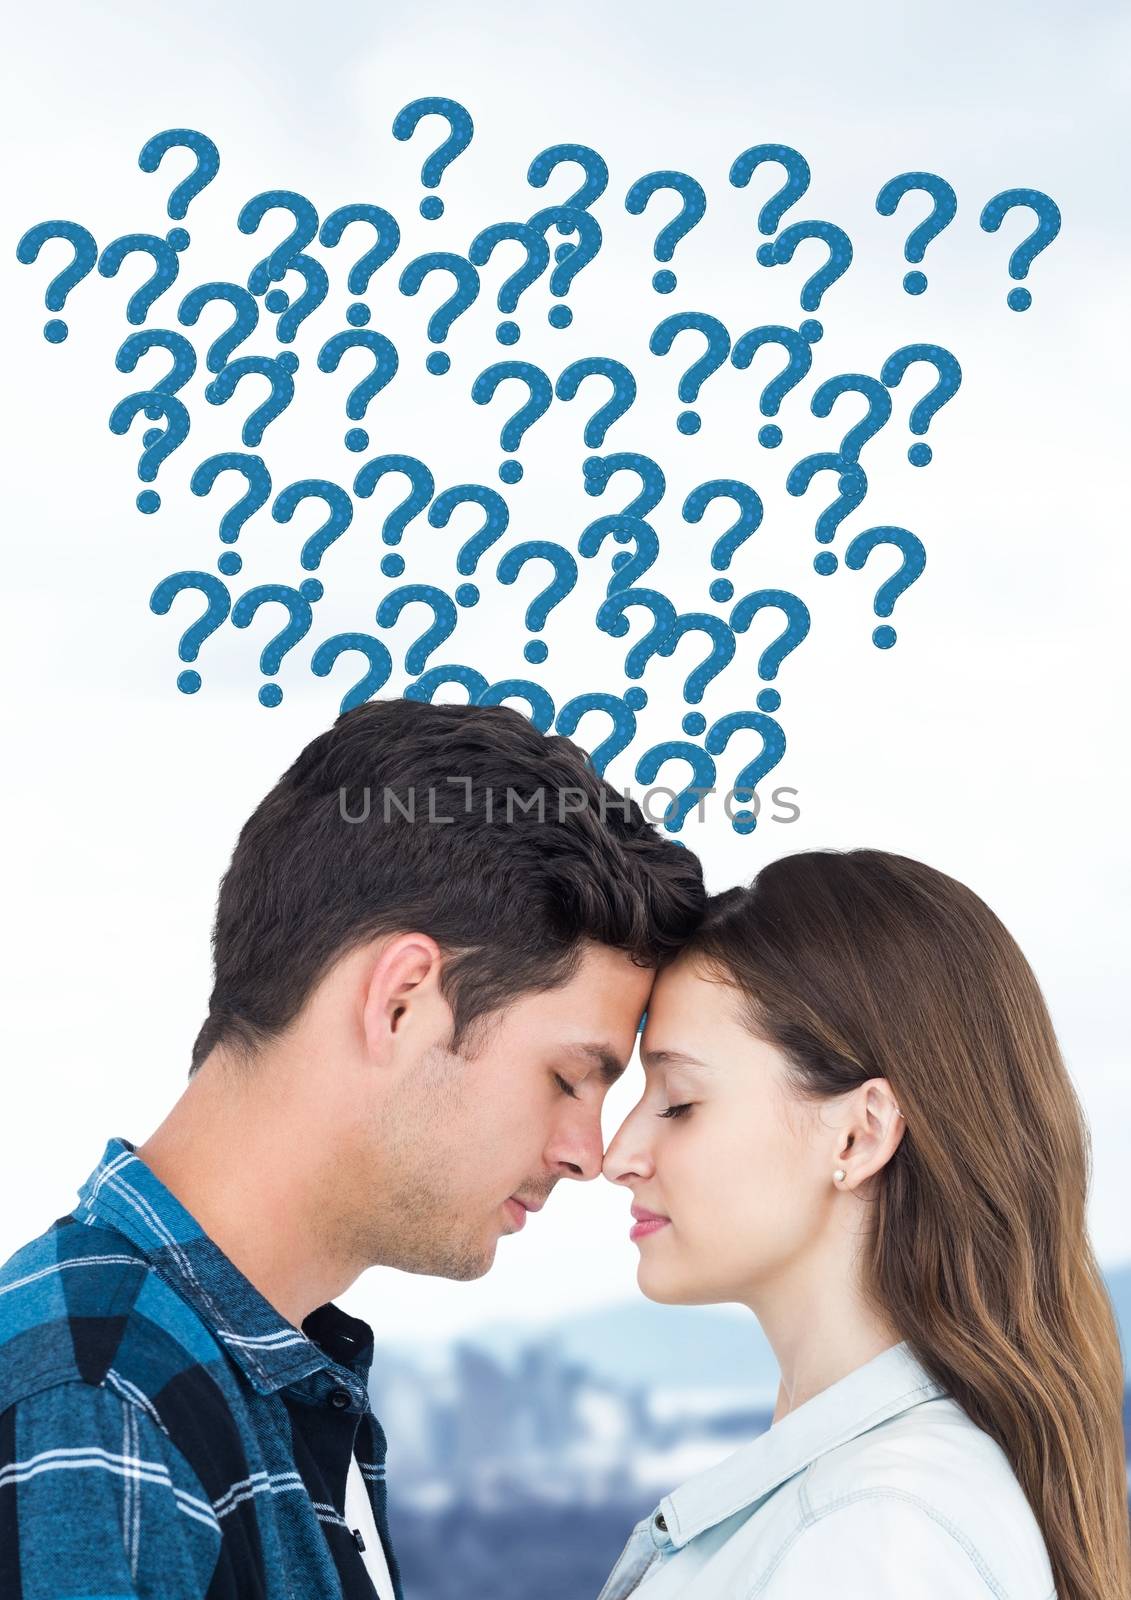 Digital composite of Couple thinking with question marks